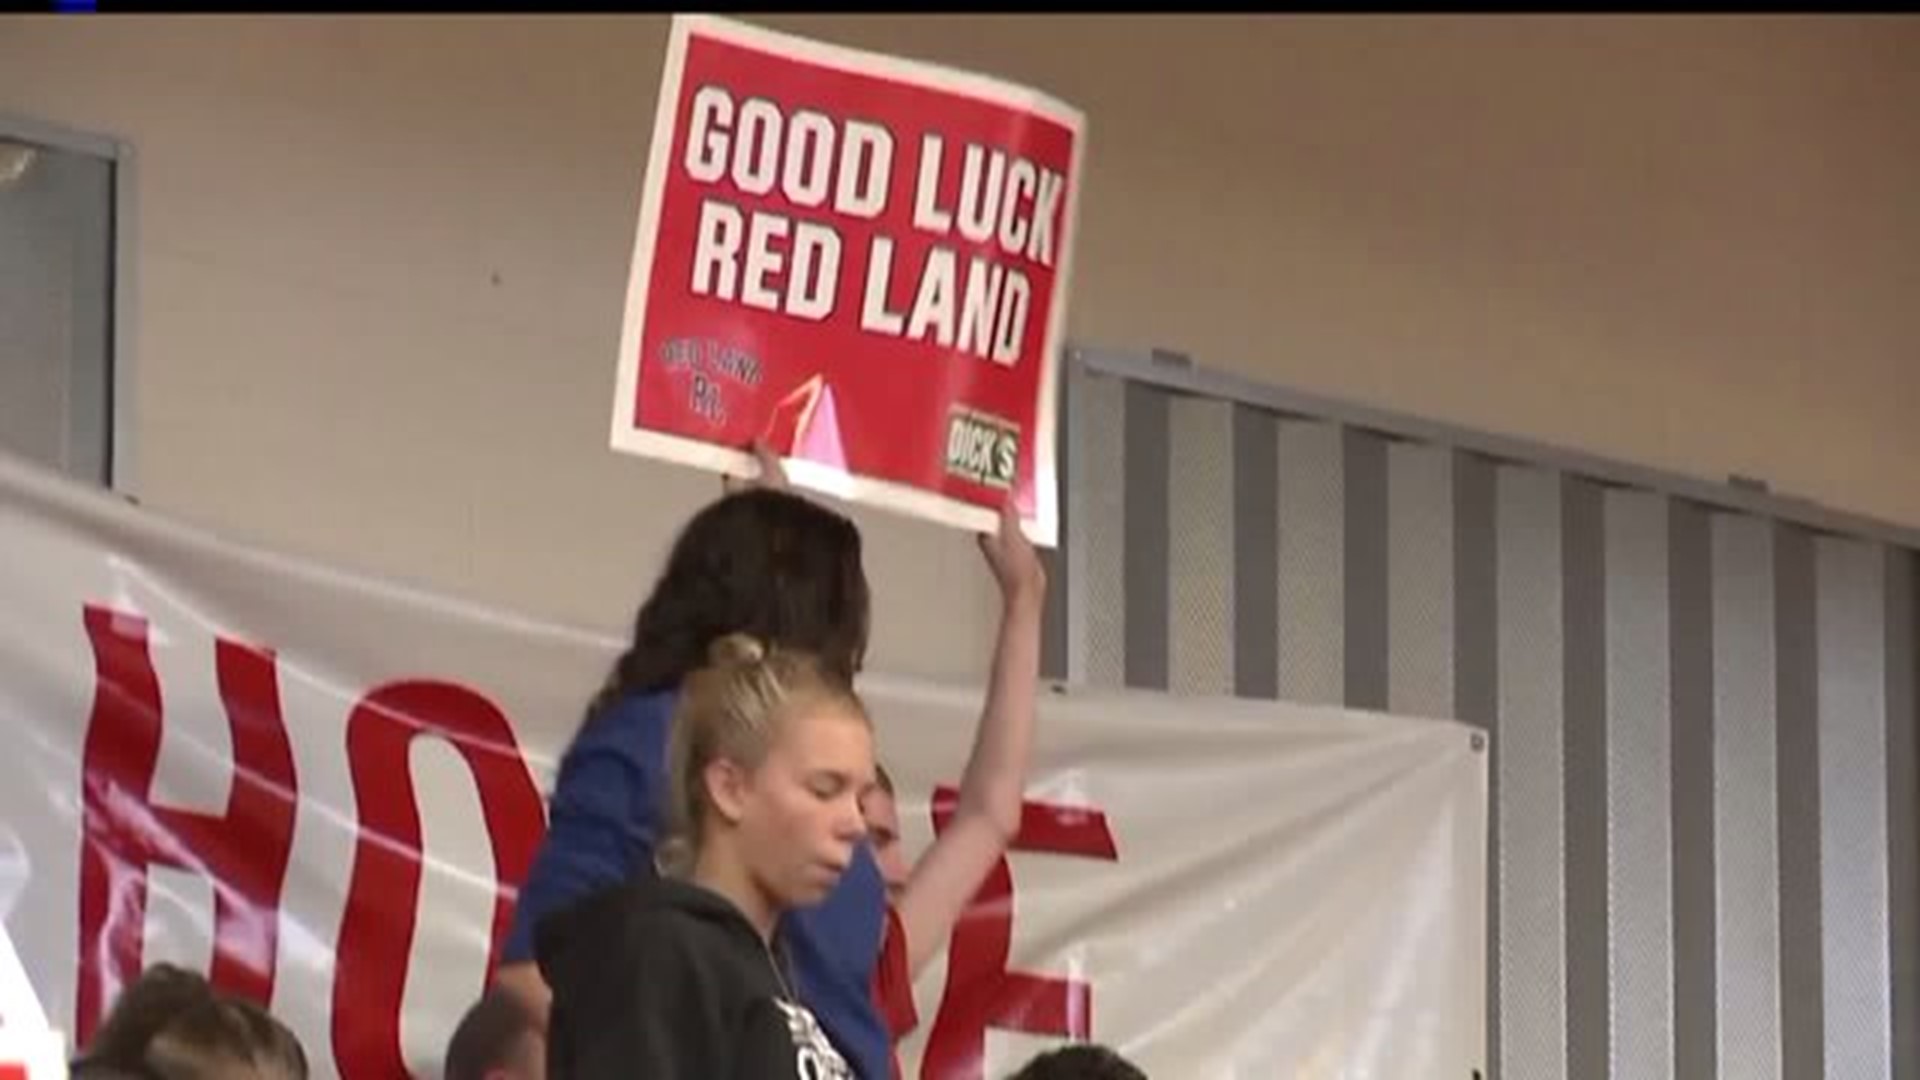 Cheering on Red Land